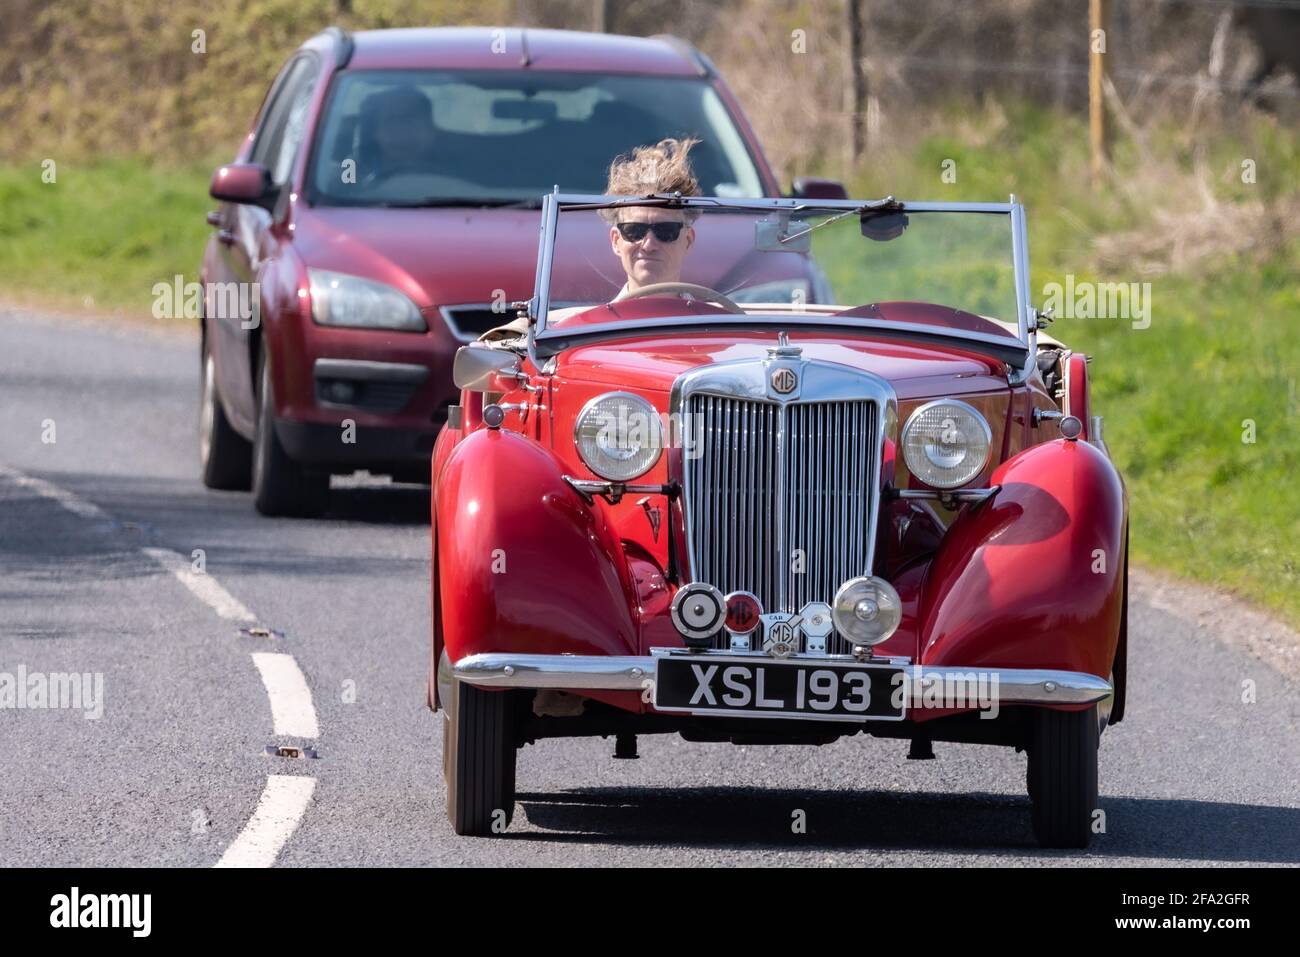 Wind in the hair motoring, man driving a classic red MG sports car, Alresford, Hampshire, UK Stock Photo